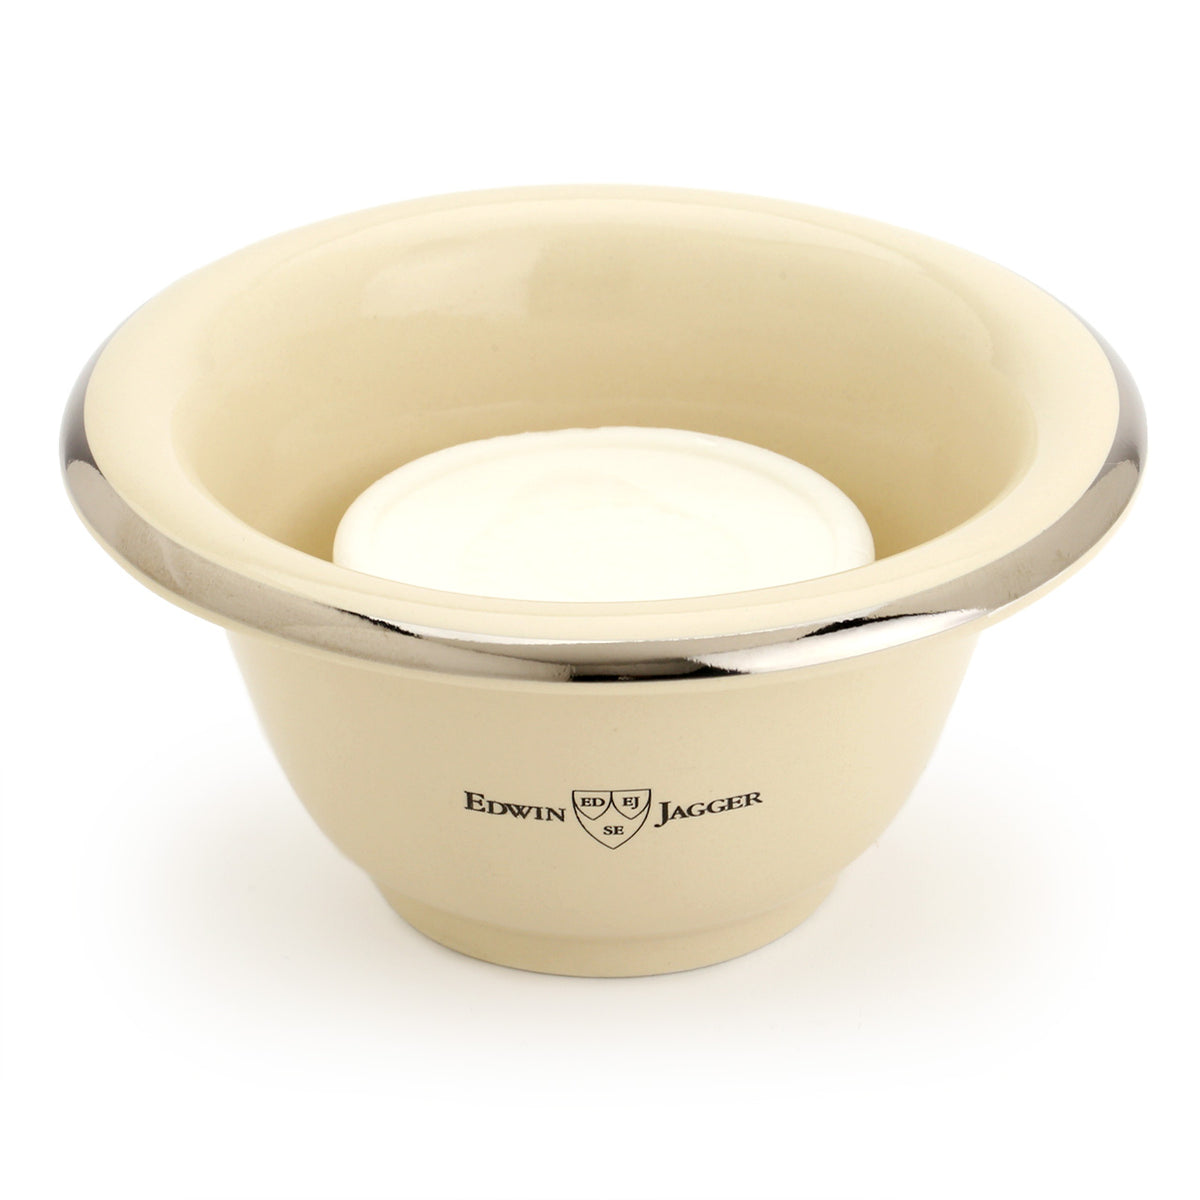 Edwin Jagger Ivory Lather Bowl with a puck of shave soap fitting neatly inside - soap bought separately